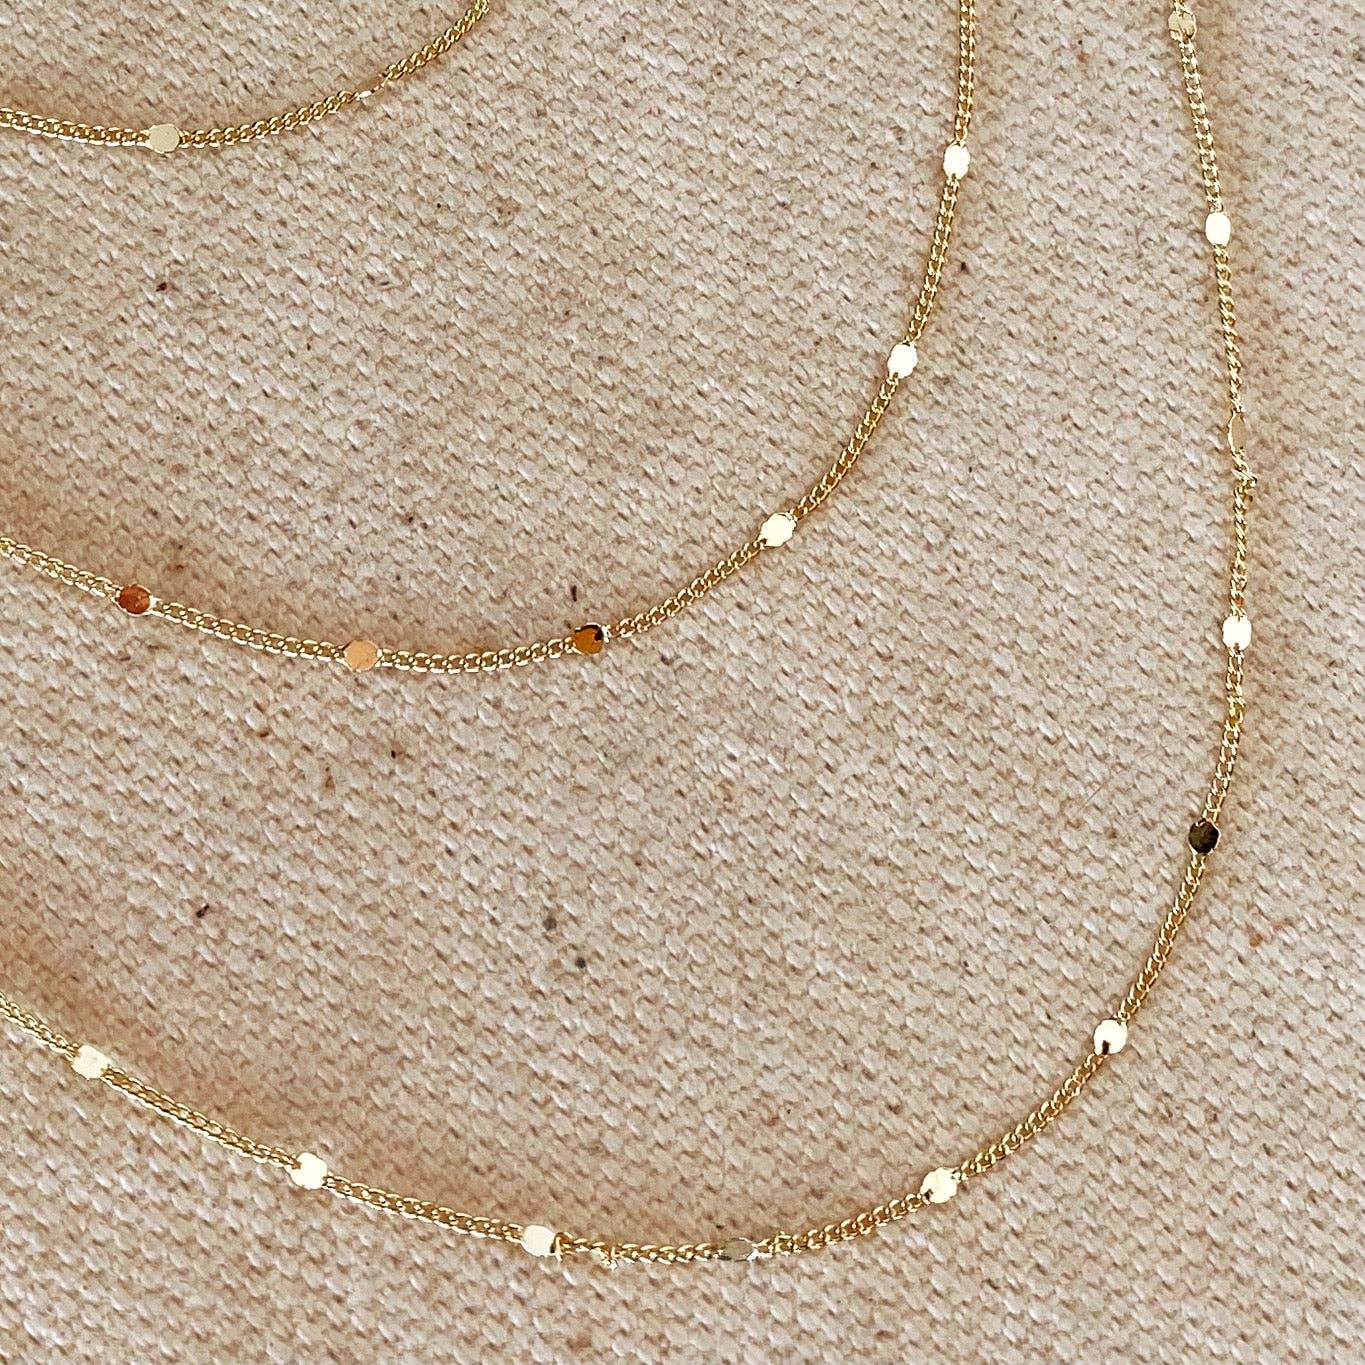 Pressed Chain Necklace, 18k Gold Filled